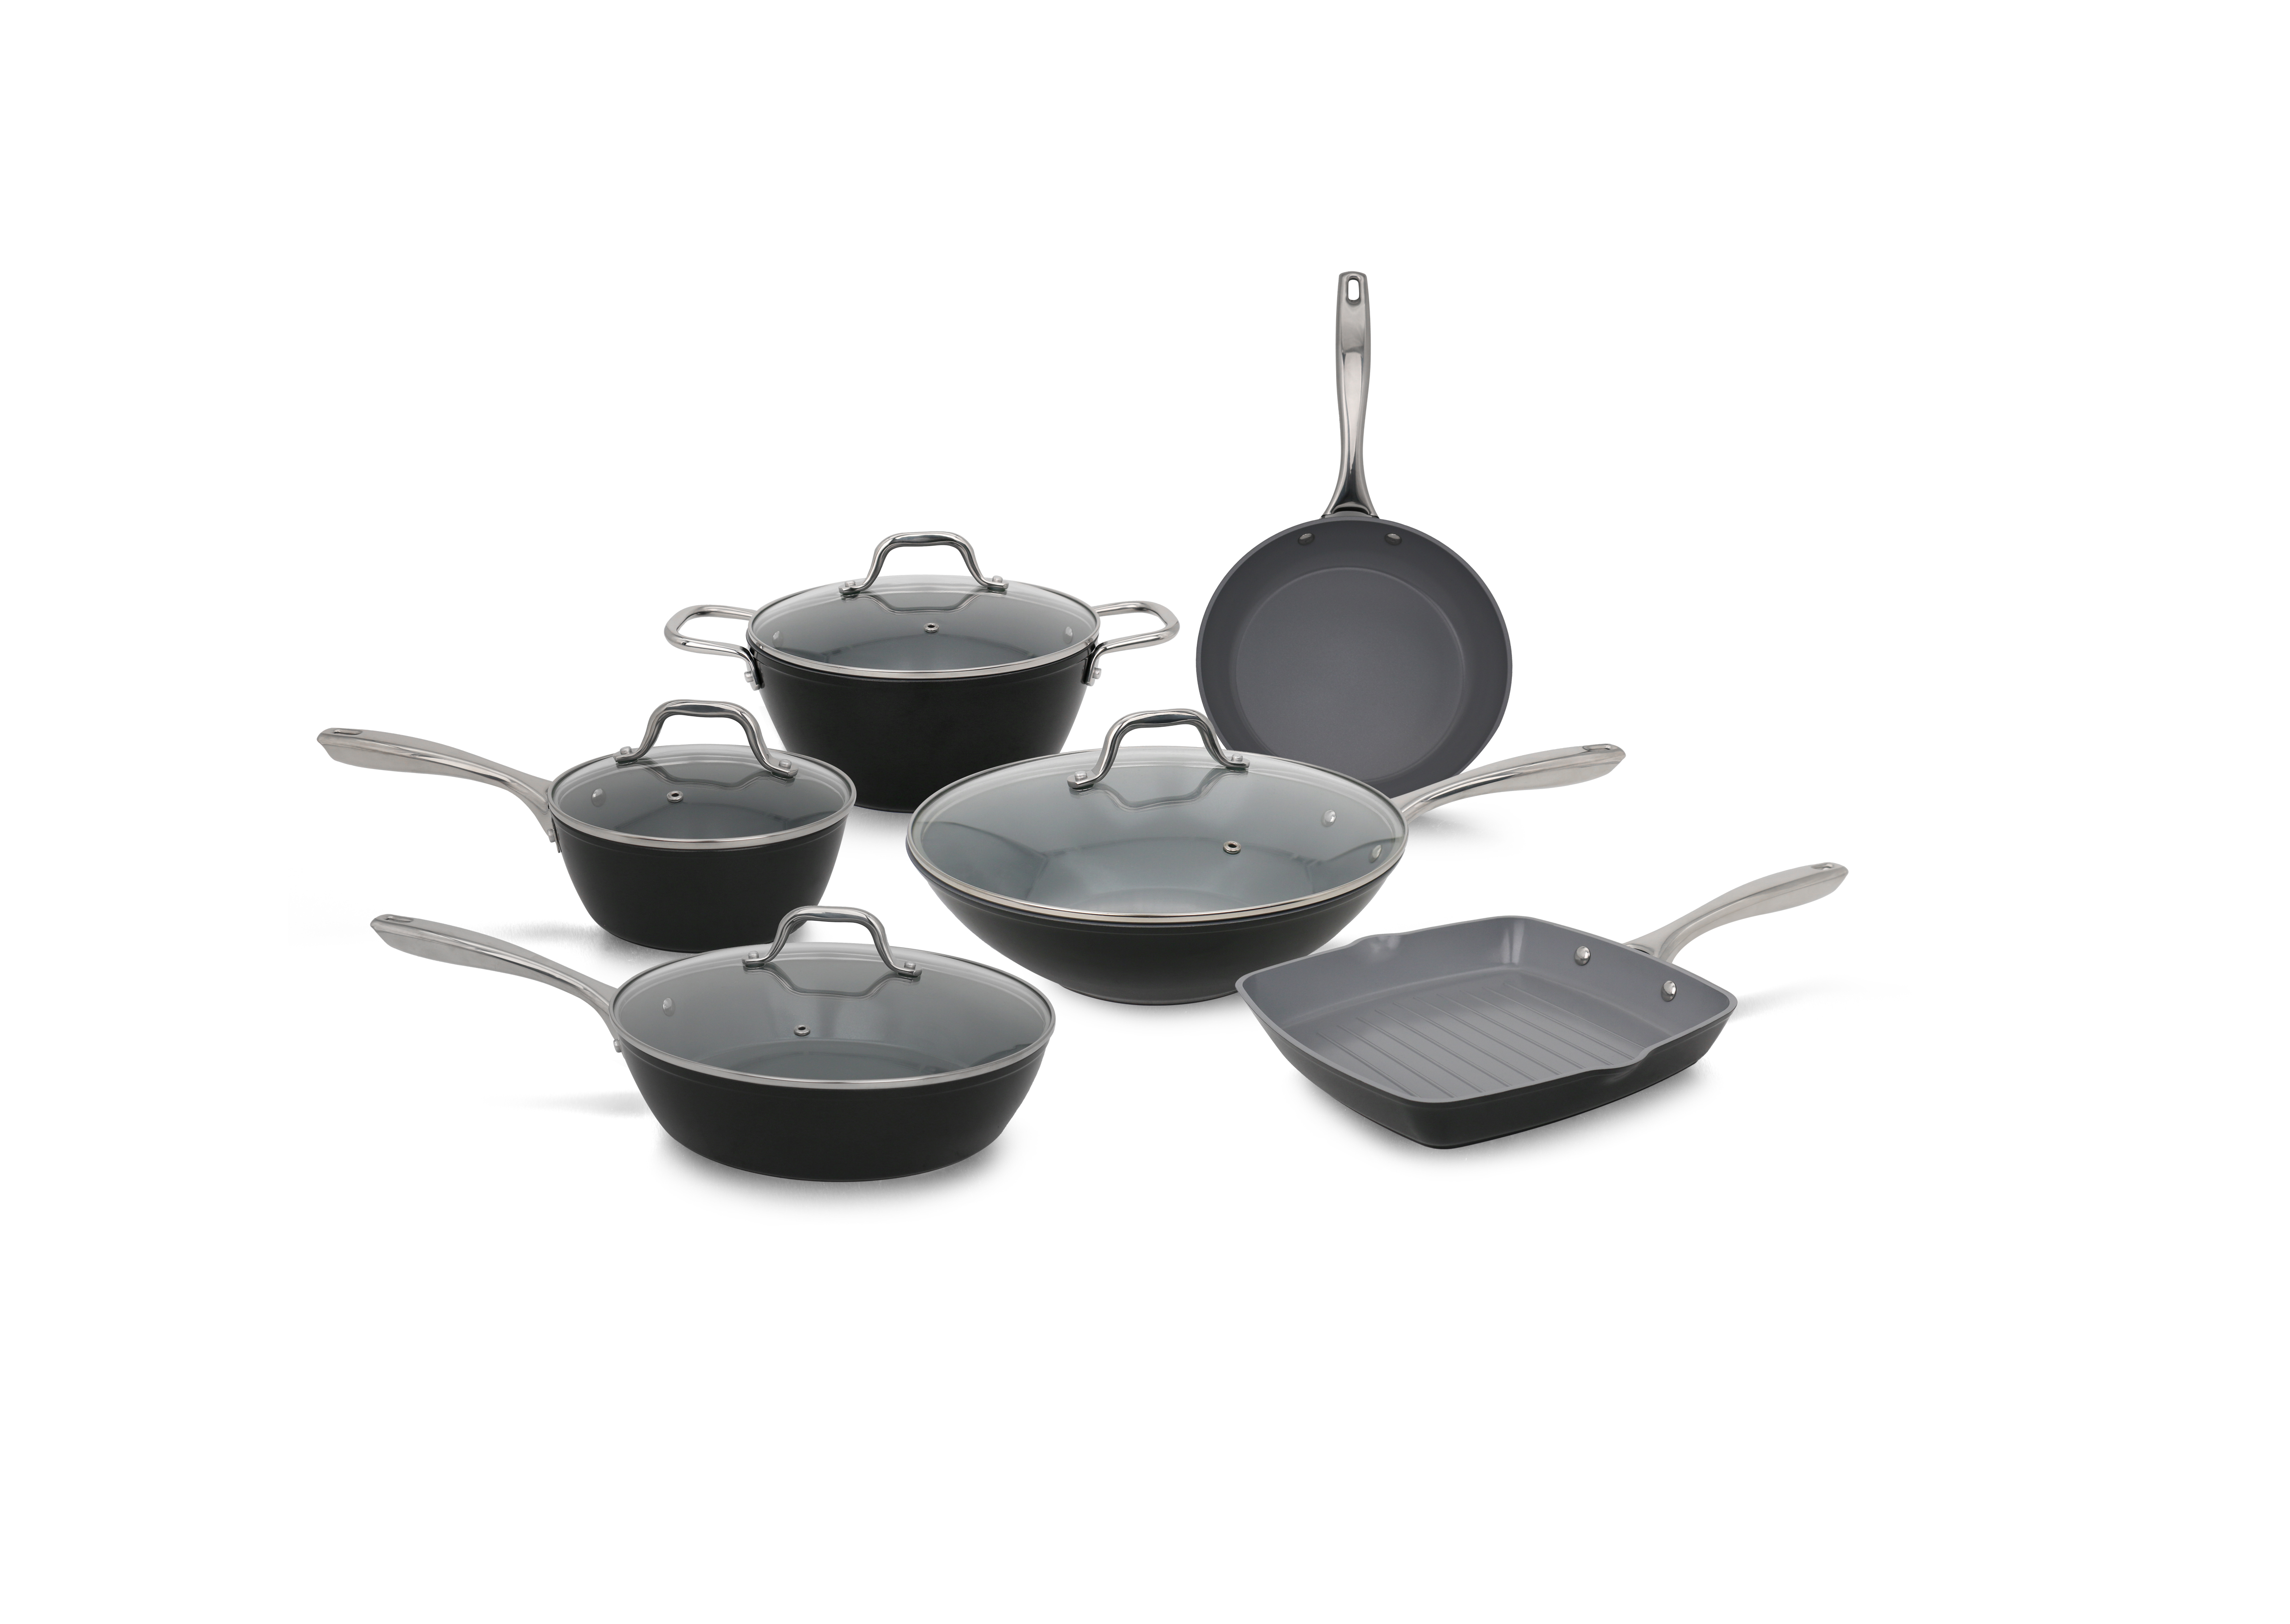 Aluminum Forged Prime Ceramic Cookware Collection